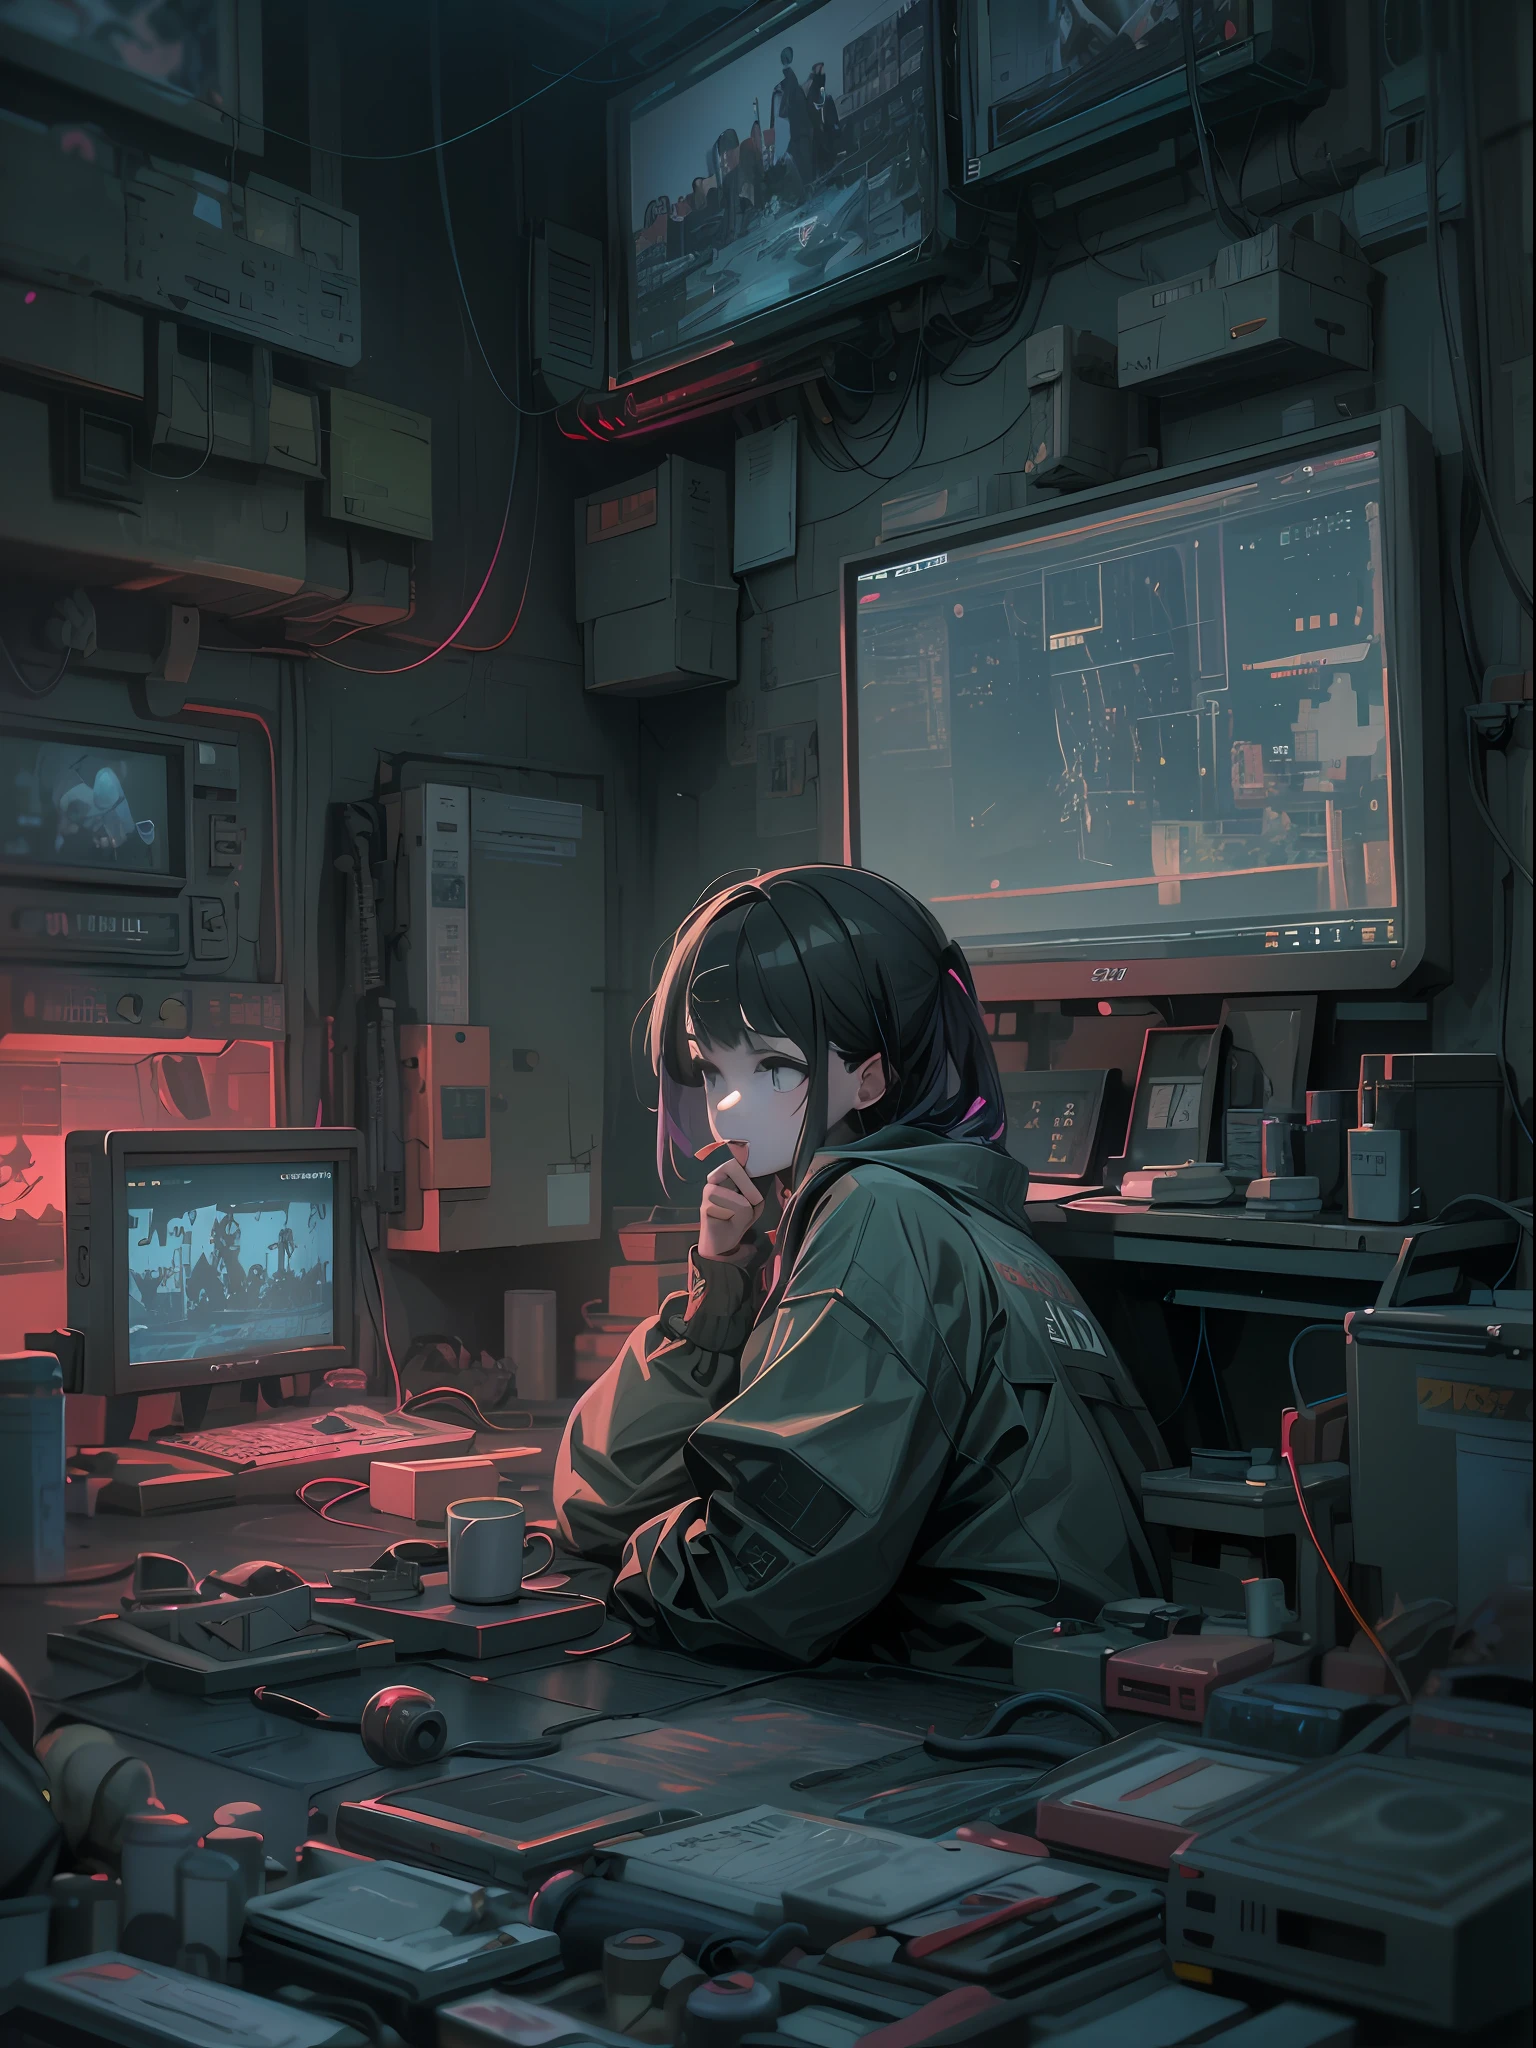 An anime scene where a woman sits at a table with a lot of electronics, Digital cyberpunk anime art, digitl cyberpunk - anime art, cyberpunk anime art, Cyberpunk art style, anime cyberpunk art, cyberpunk theme art, Guviz-style artwork, cyberpunk atmosphere, cyberpunk artstyle, muted cyberpunk style, cyberpunk illustration, detailed cyberpunk illustration, Advanced digital cyberpunk art